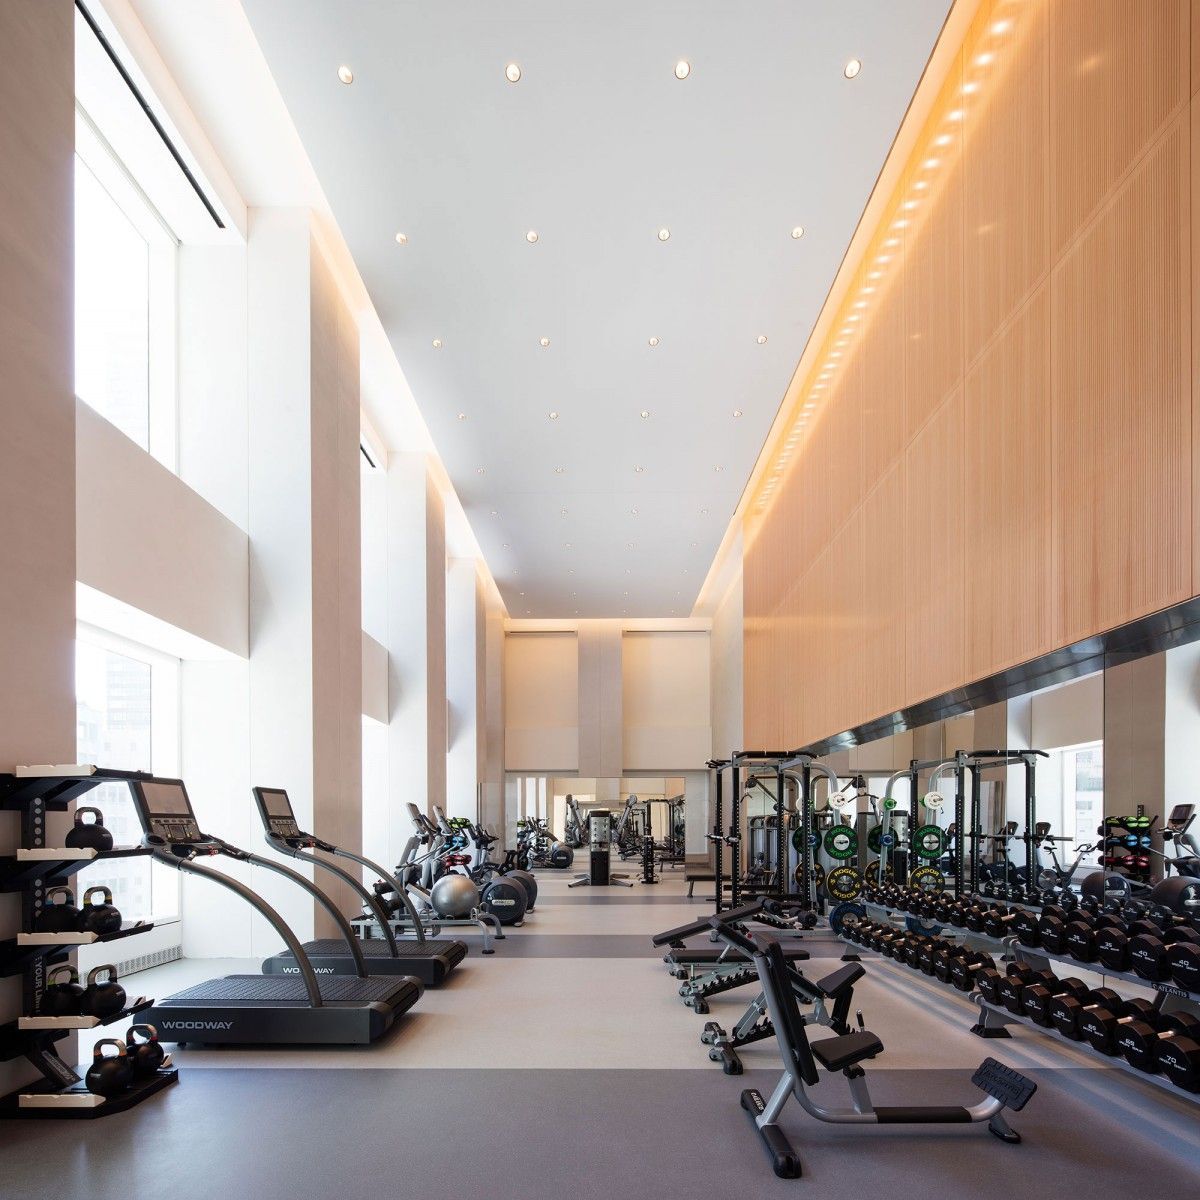 New Images Reveal 432 Park Avenue's Luxury Amenity Spaces -   17 modern fitness center interior ideas